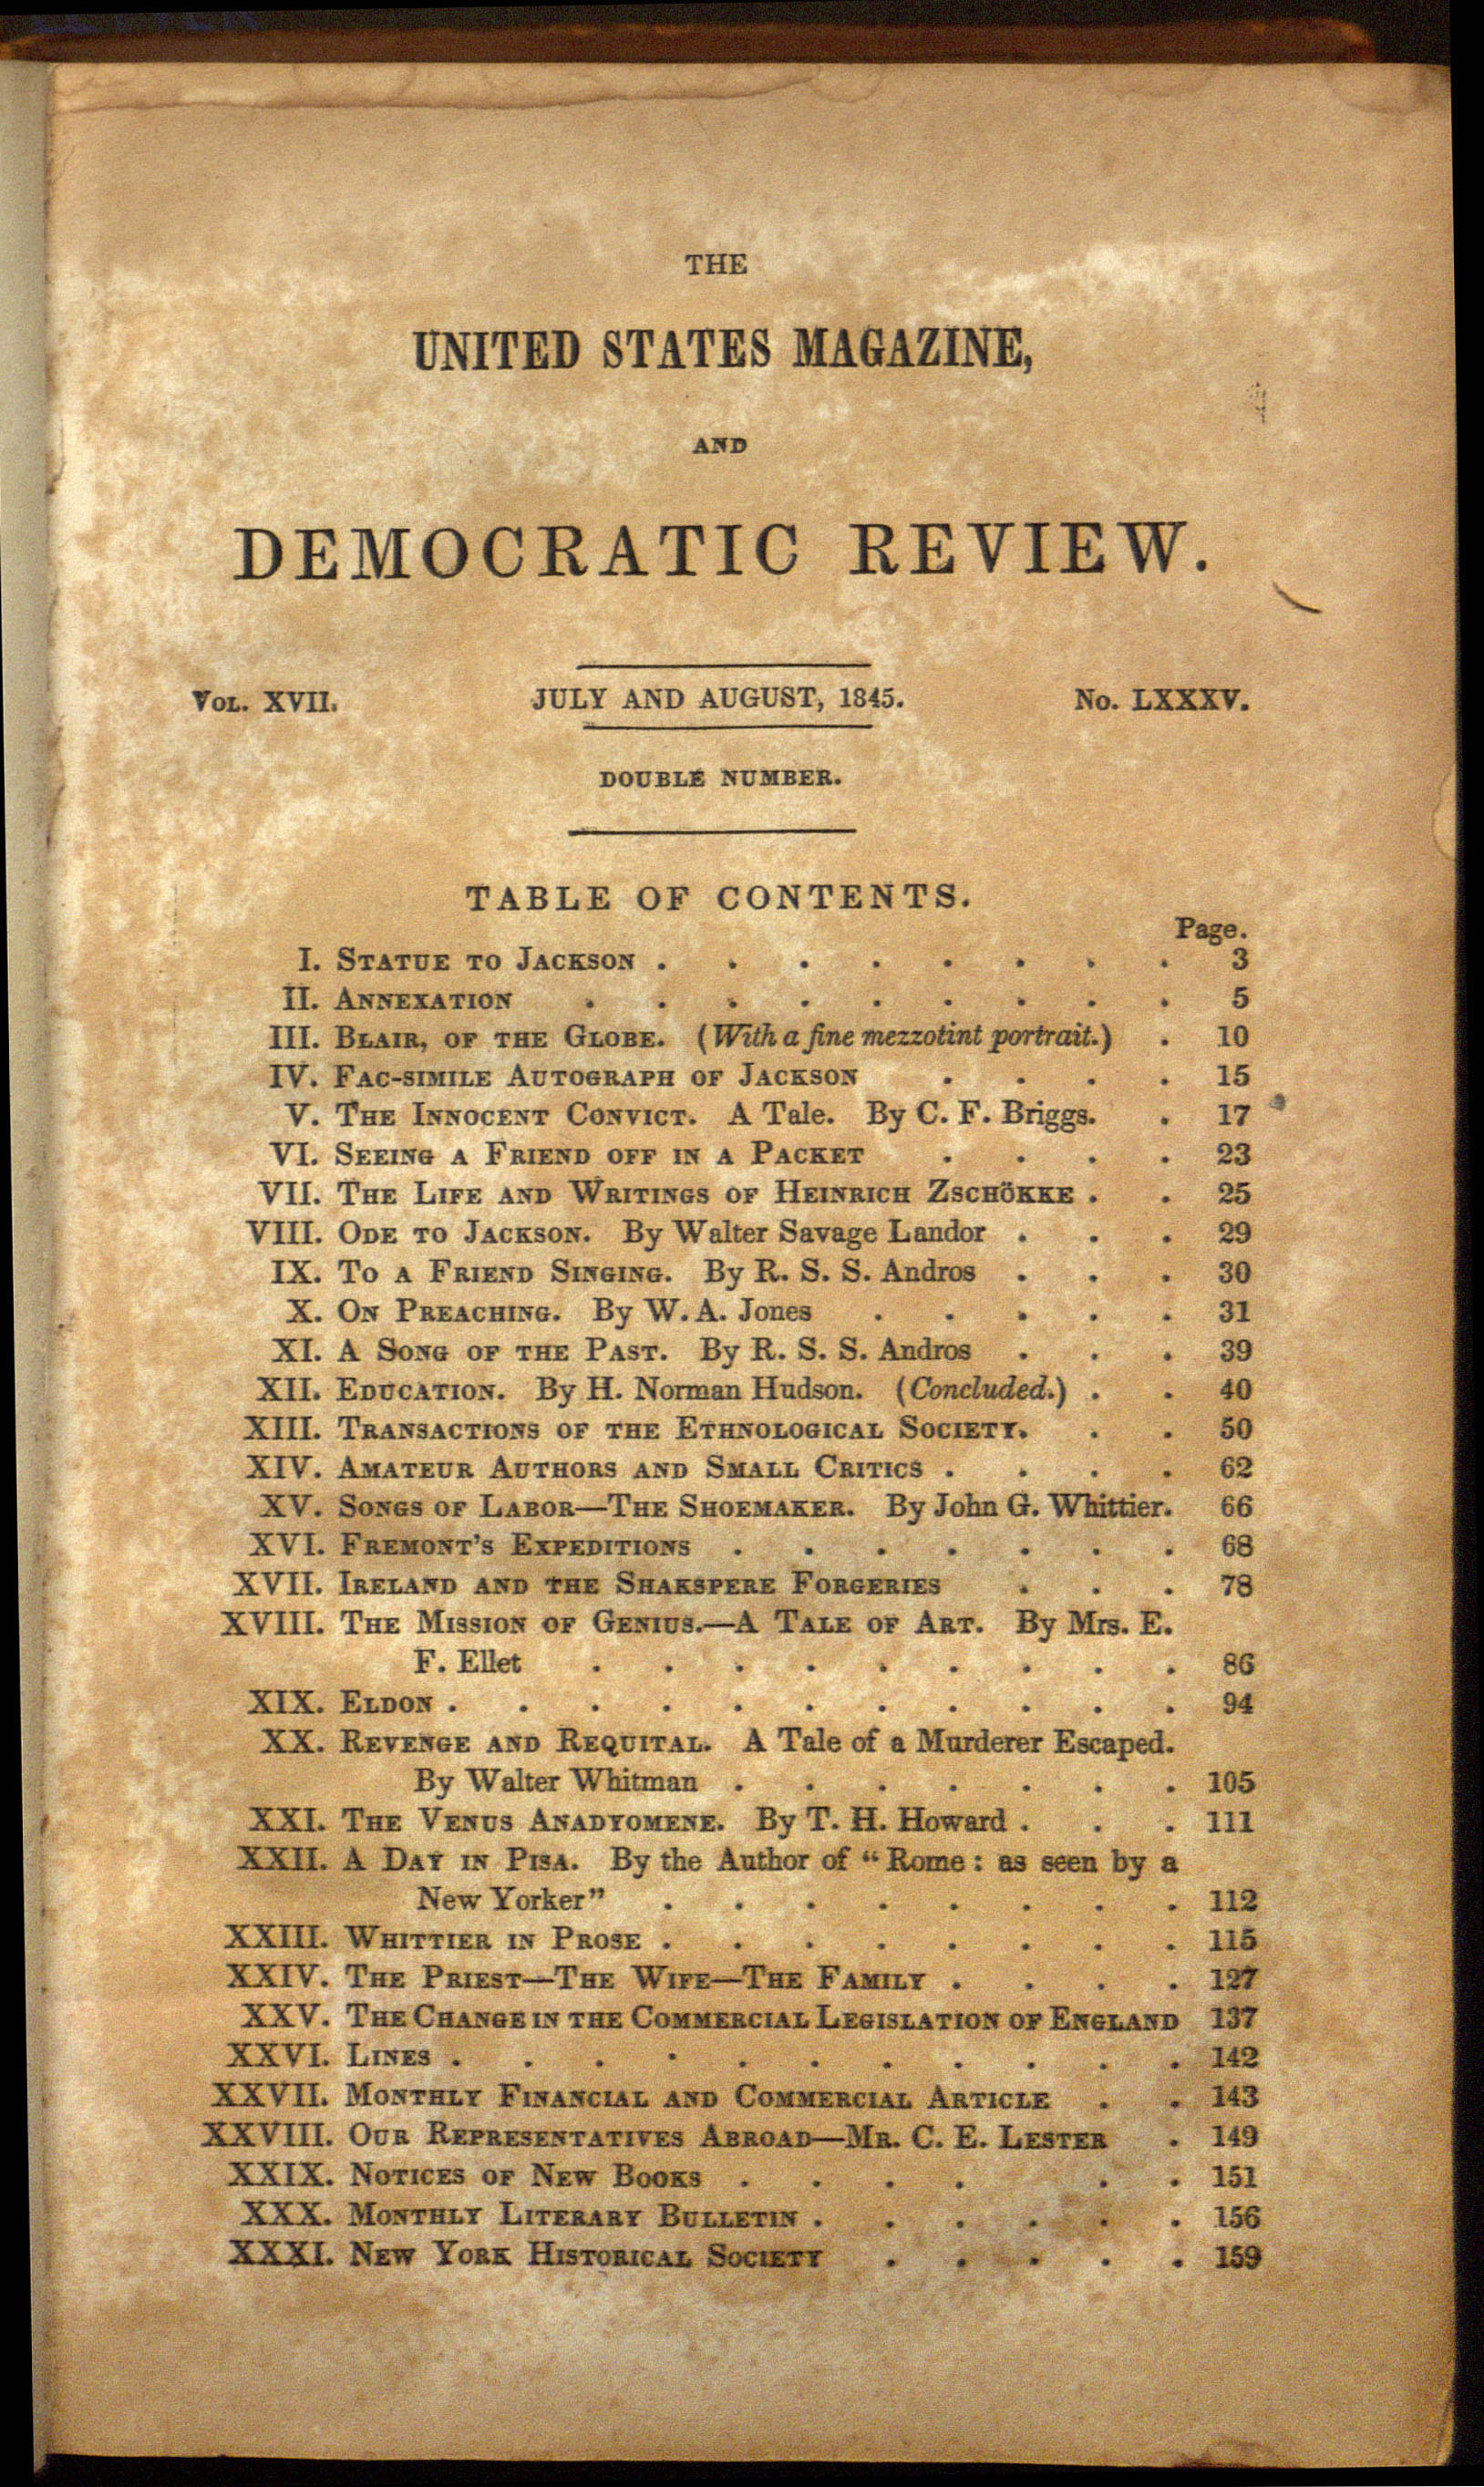 Democratic Review, contents page